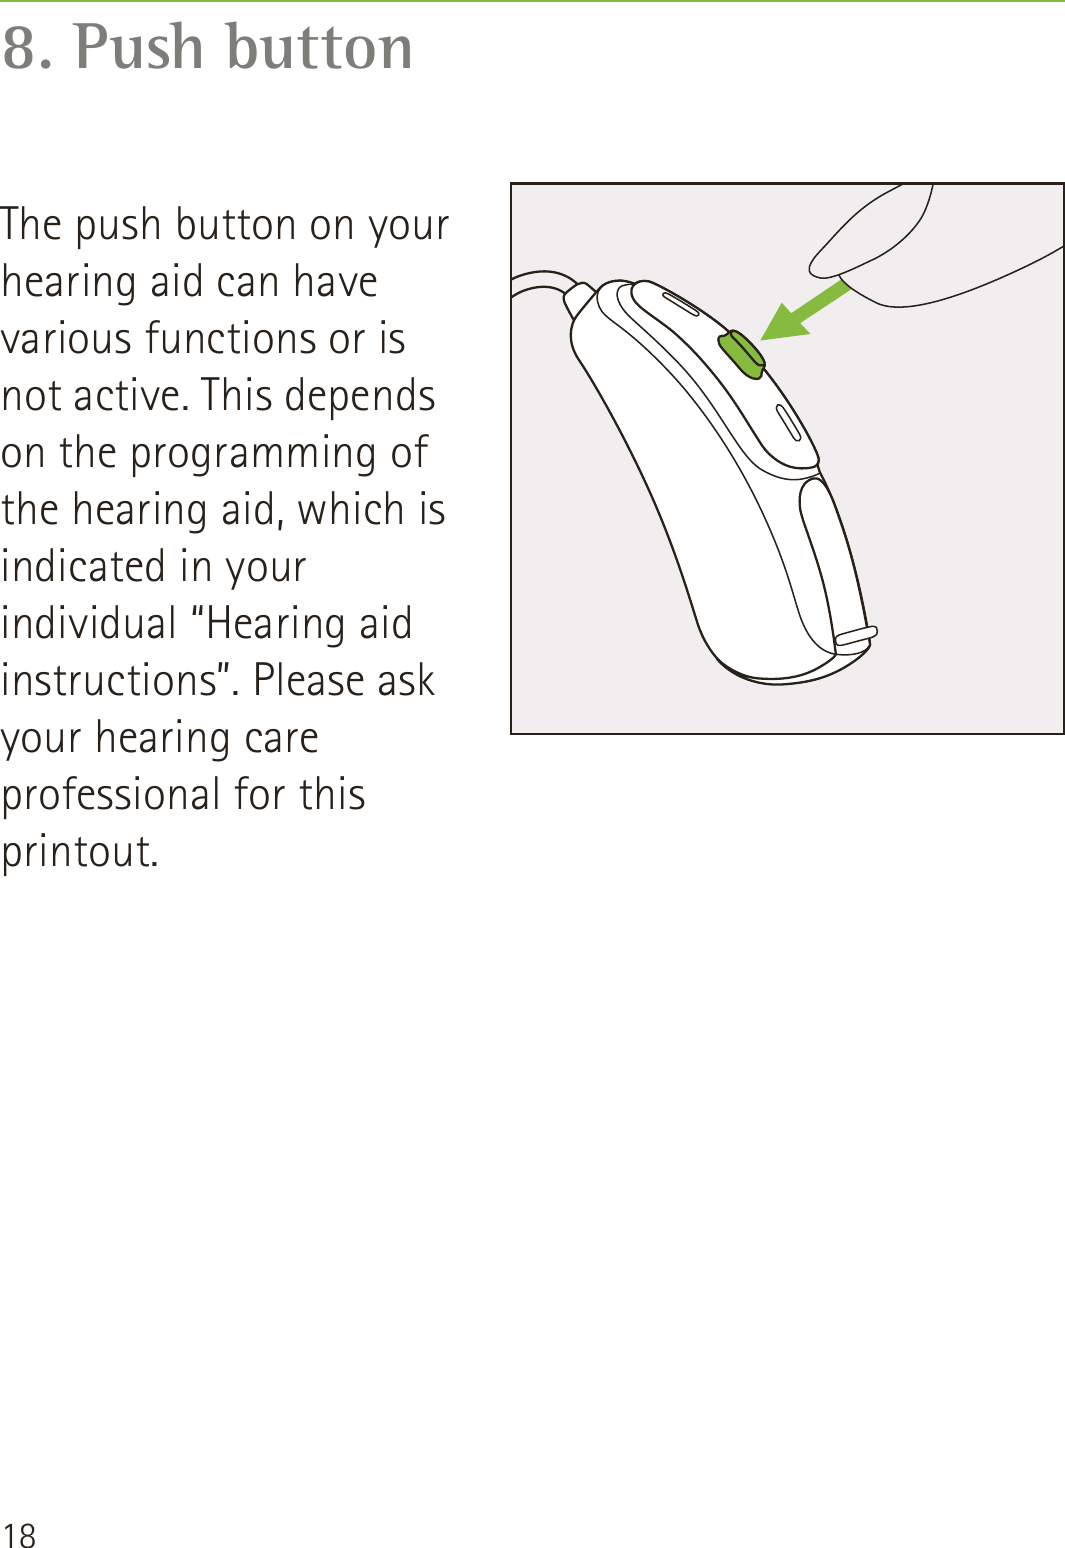 188. Push buttonThe push button on your hearing aid can have various functions or is not active. This depends on the programming of the hearing aid, which is indicated in your individual “Hearing aid instructions”. Please ask your hearing care professional for this printout.